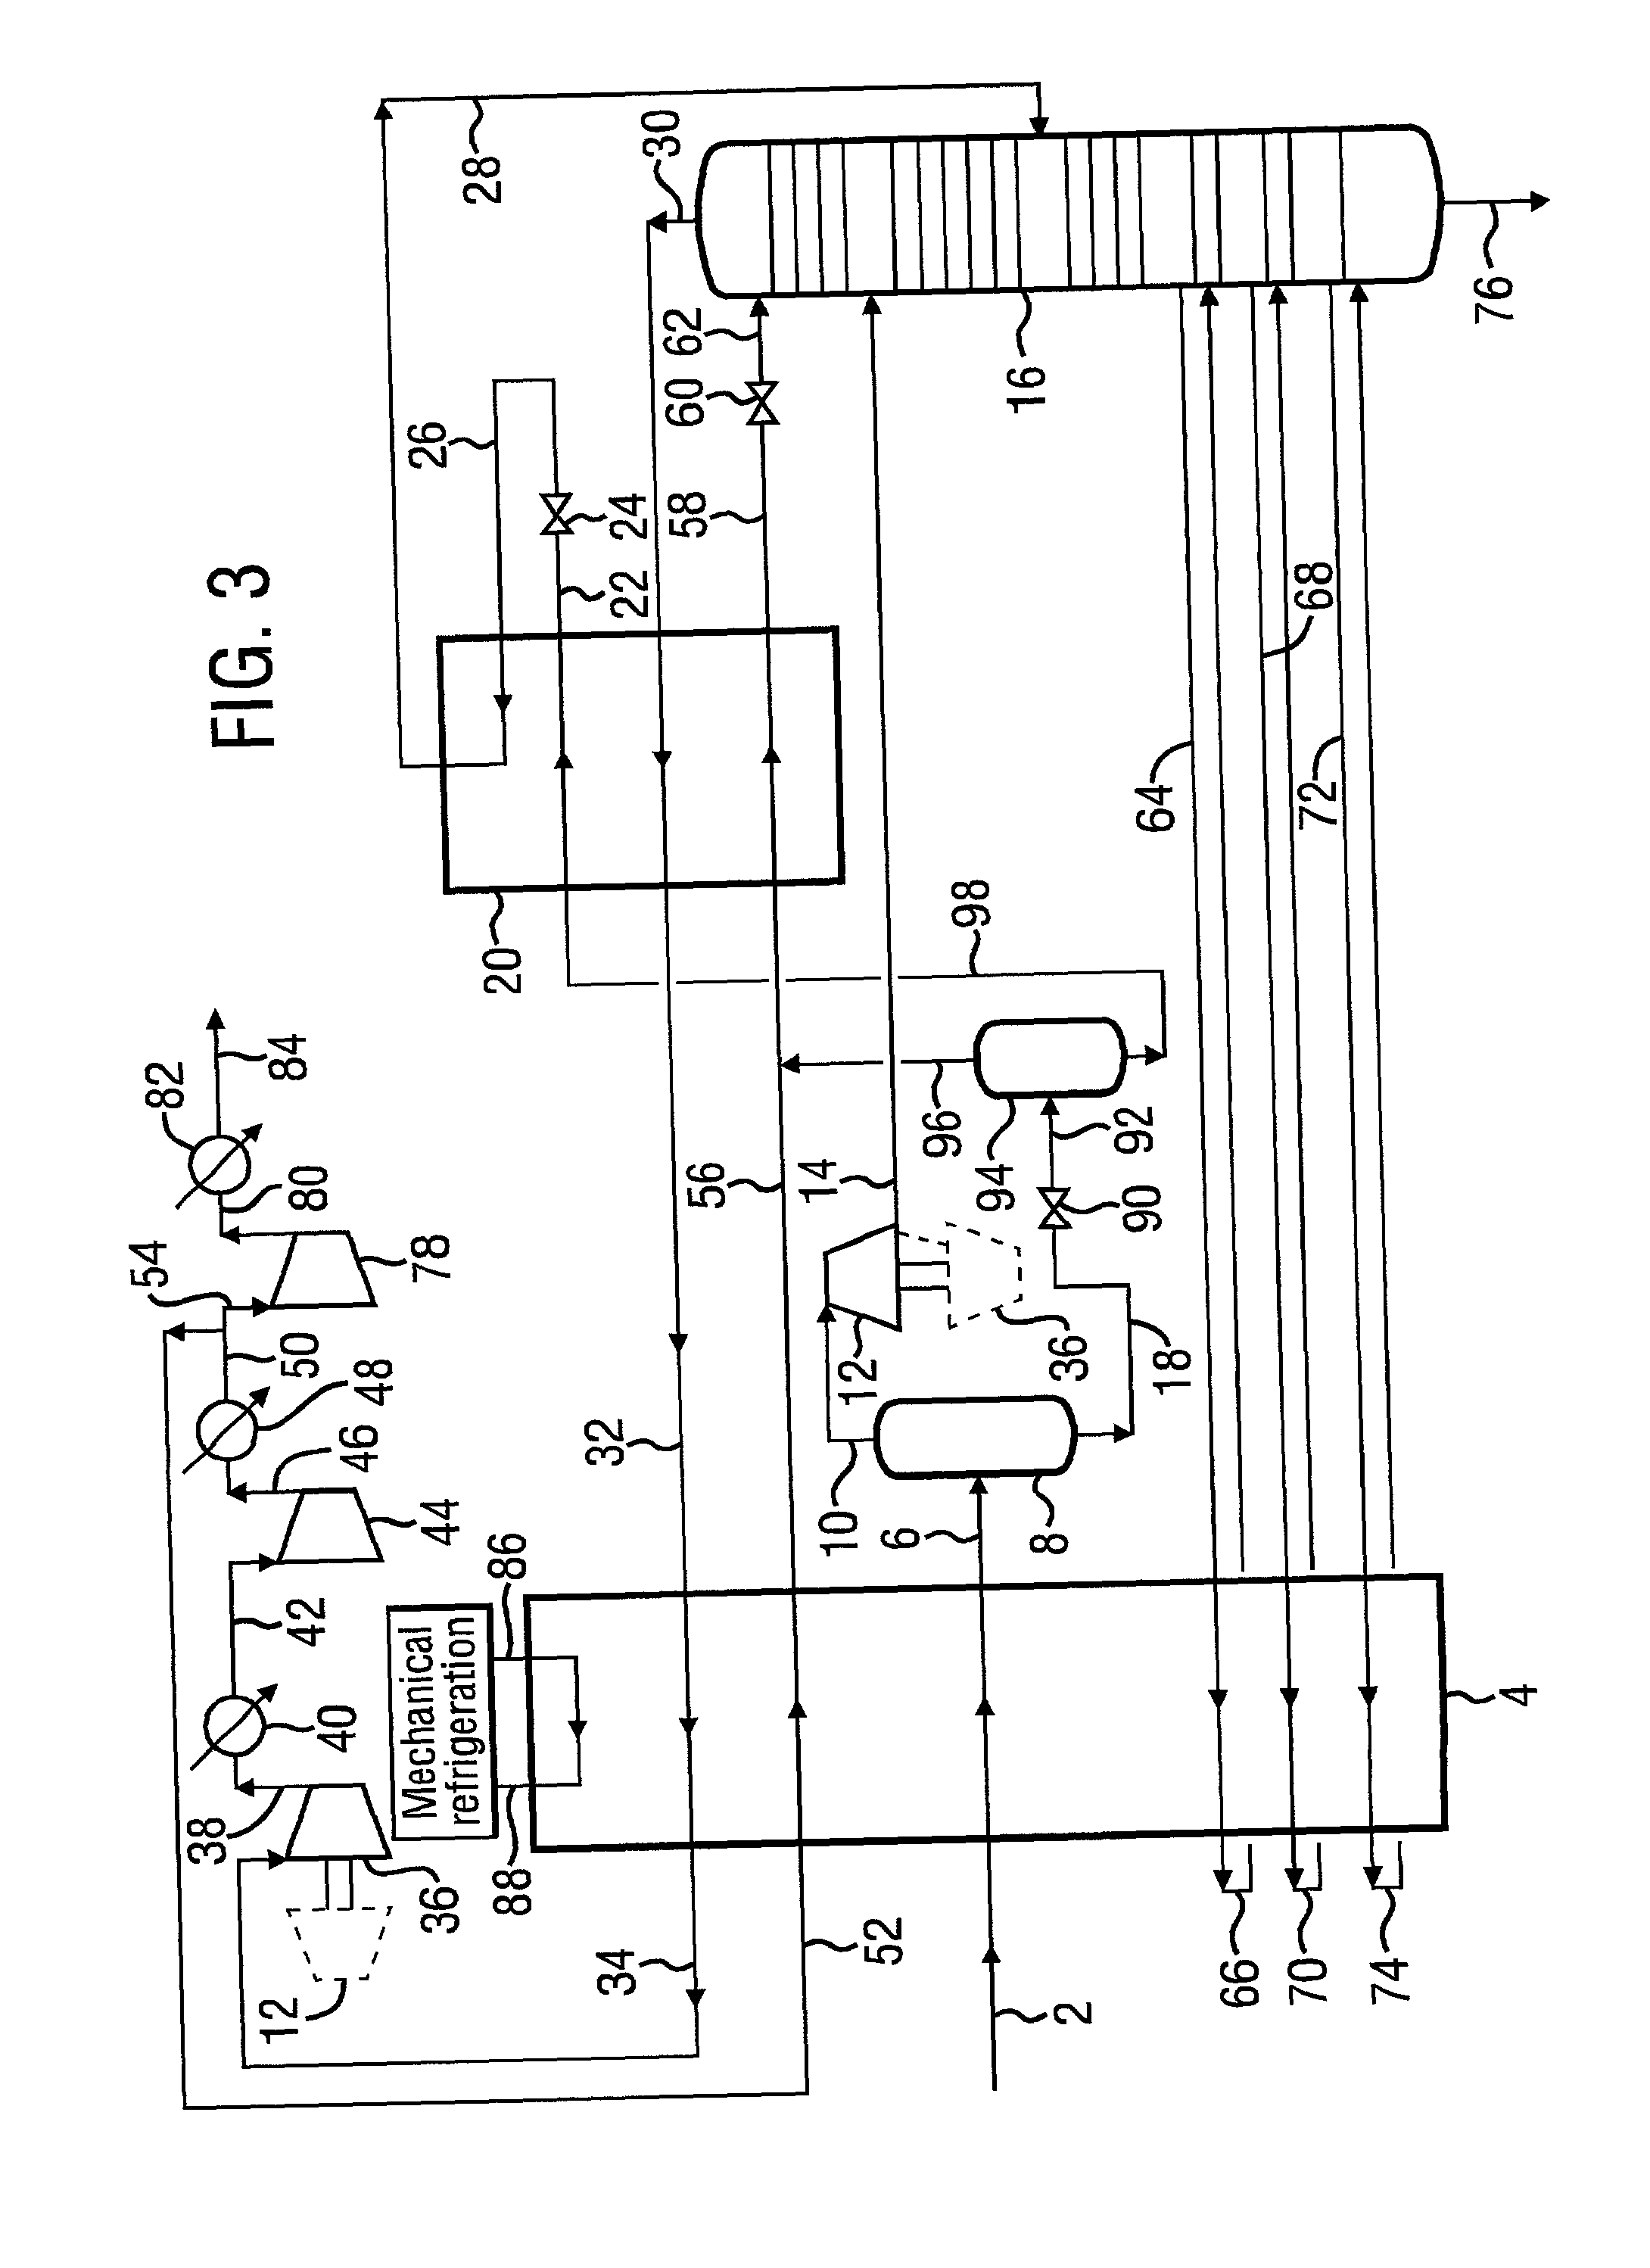 Hydrocarbon separation process and apparatus